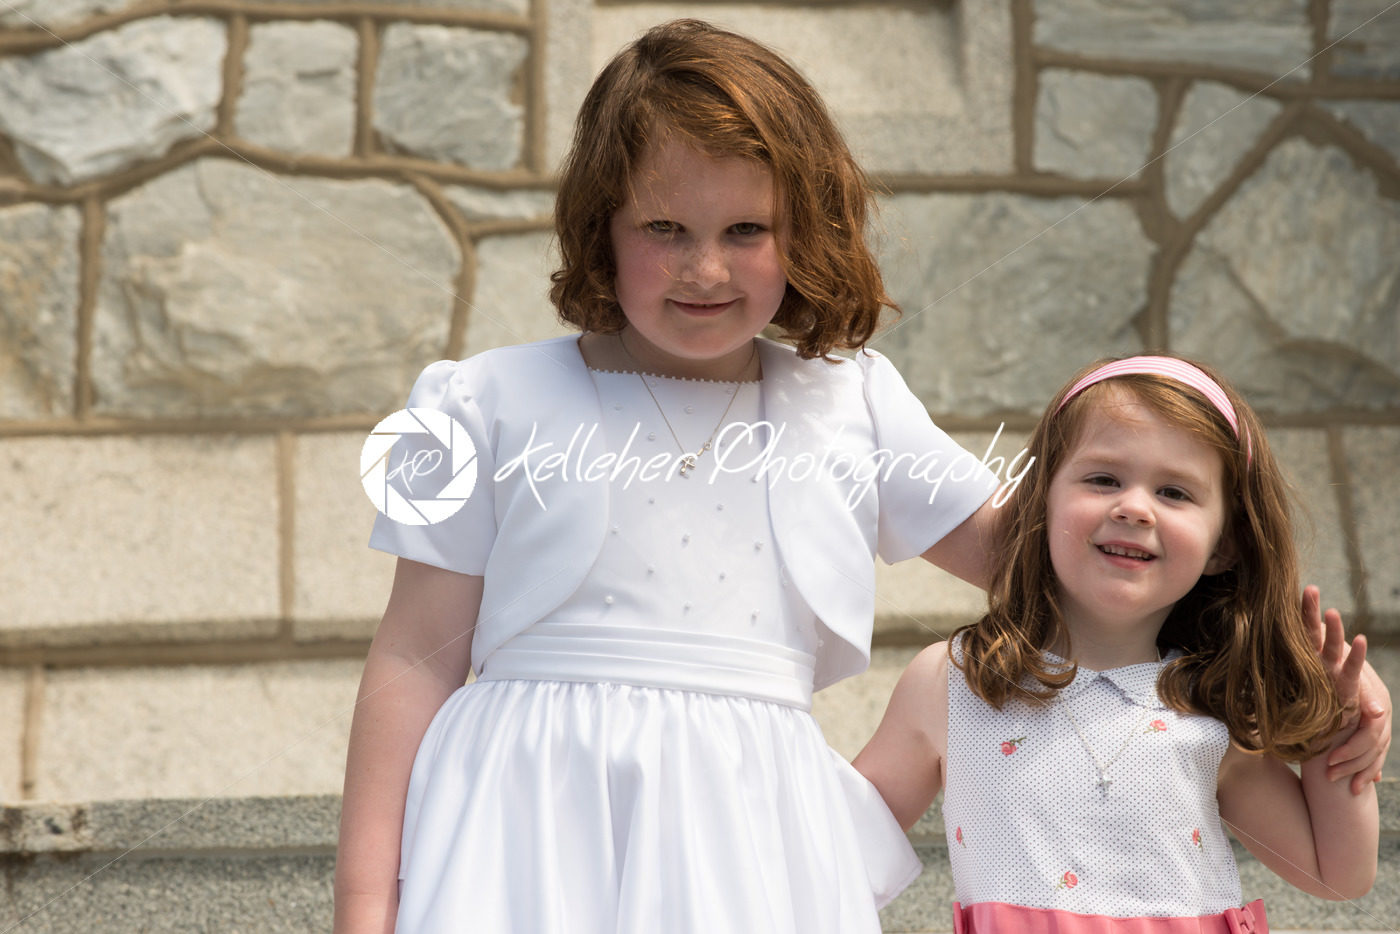 VILLANOVA, PA – MAY 14: Young Girl dressed up receiving her First Holy Communion at St. Thomas of Villanova Church - Kelleher Photography Store